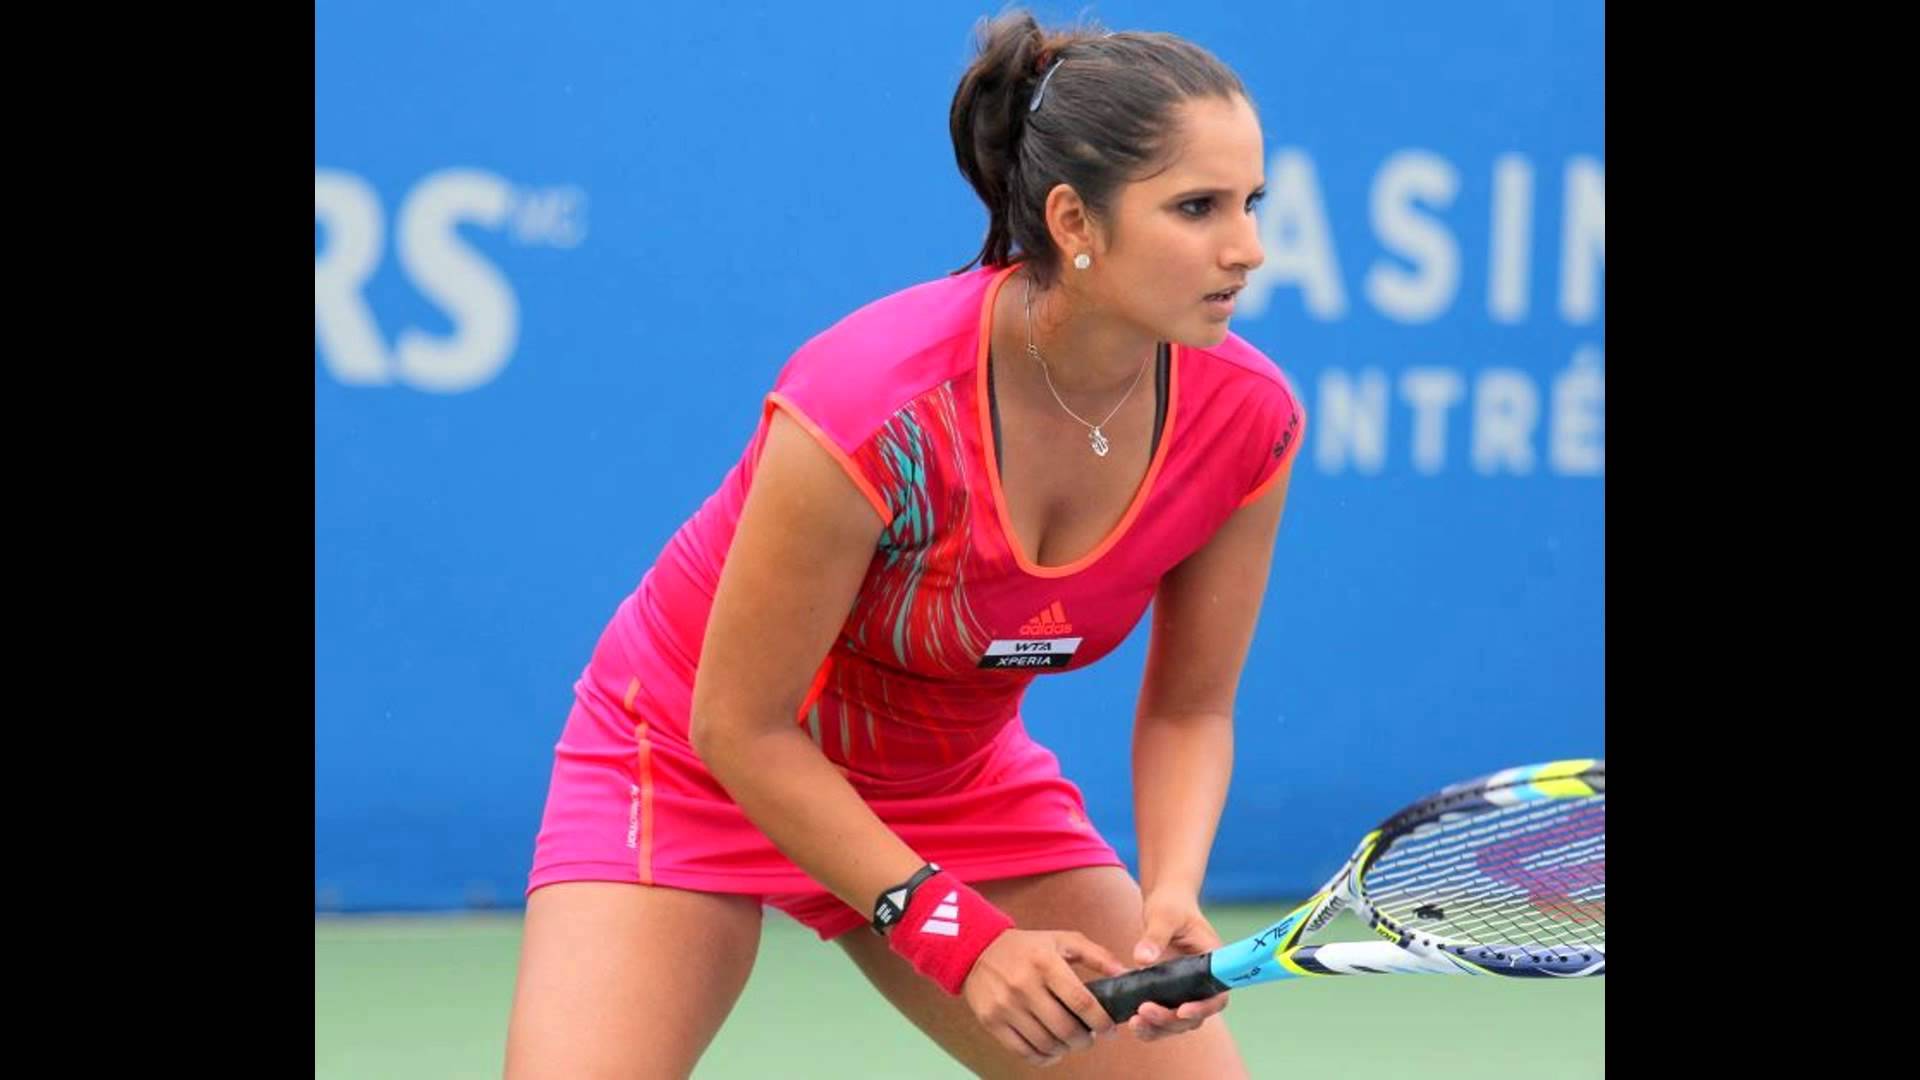 Sania Female Tennis Players 2018 767136 Hd Wallpaper And Backgrounds Download